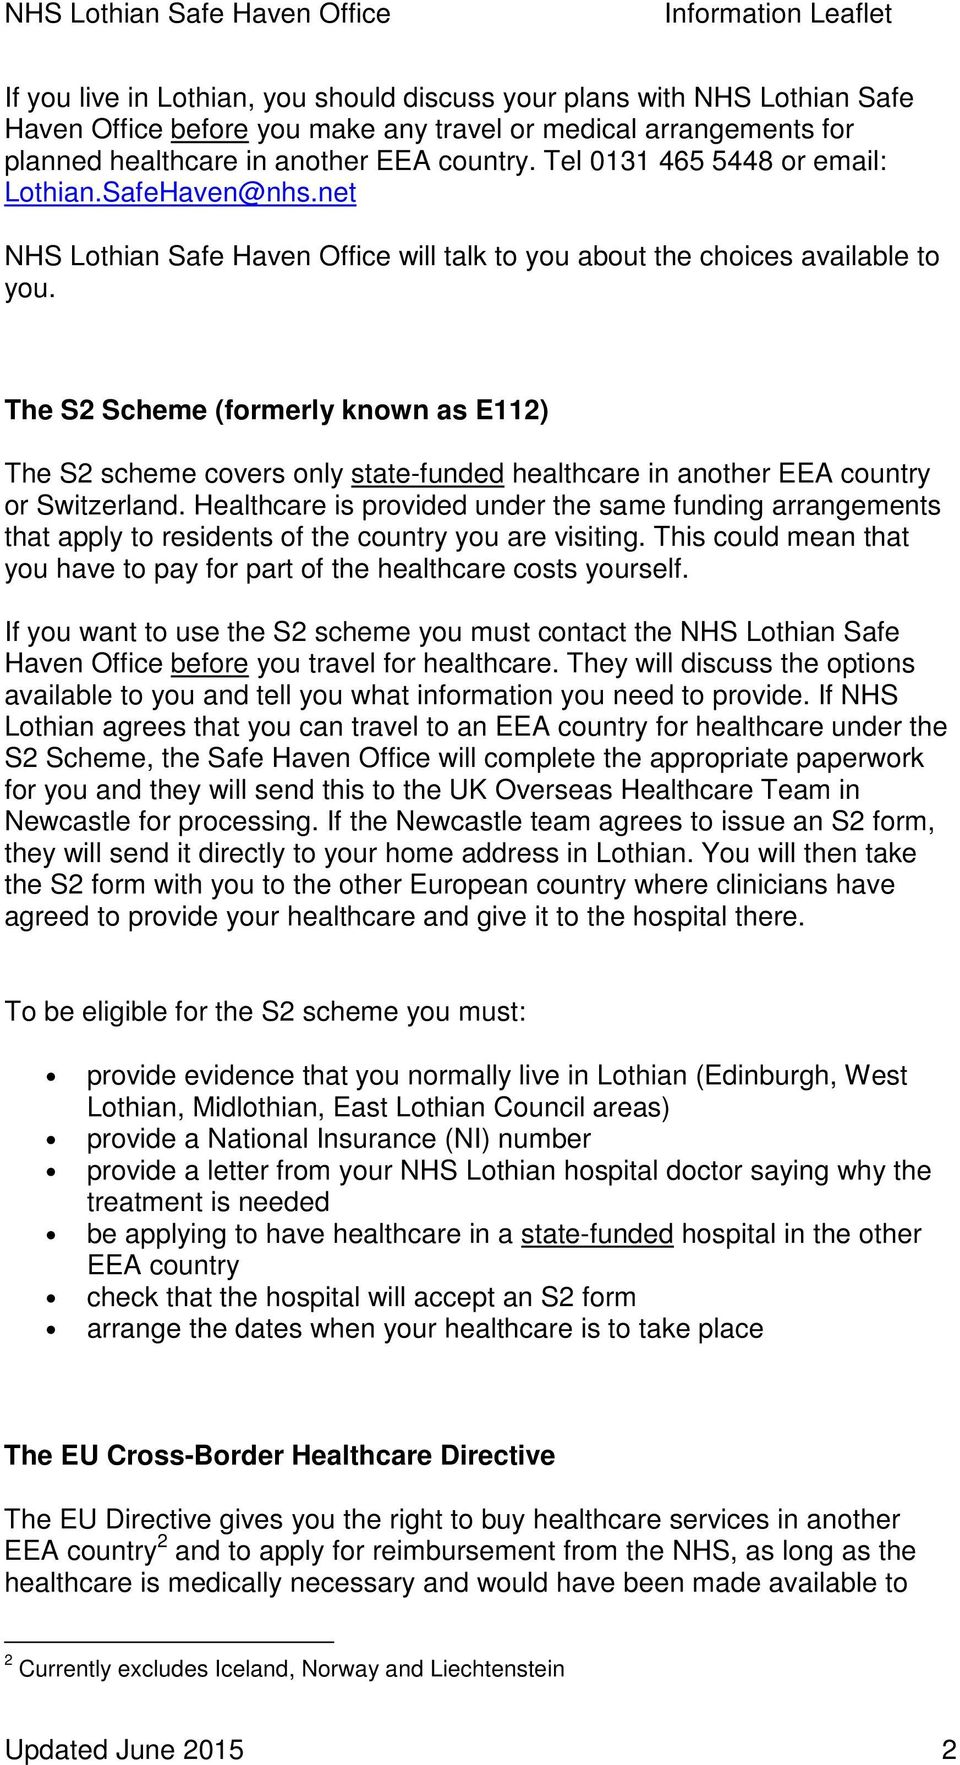 The S2 Scheme (formerly known as E112) The S2 scheme covers only state-funded healthcare in another EEA country or Switzerland.